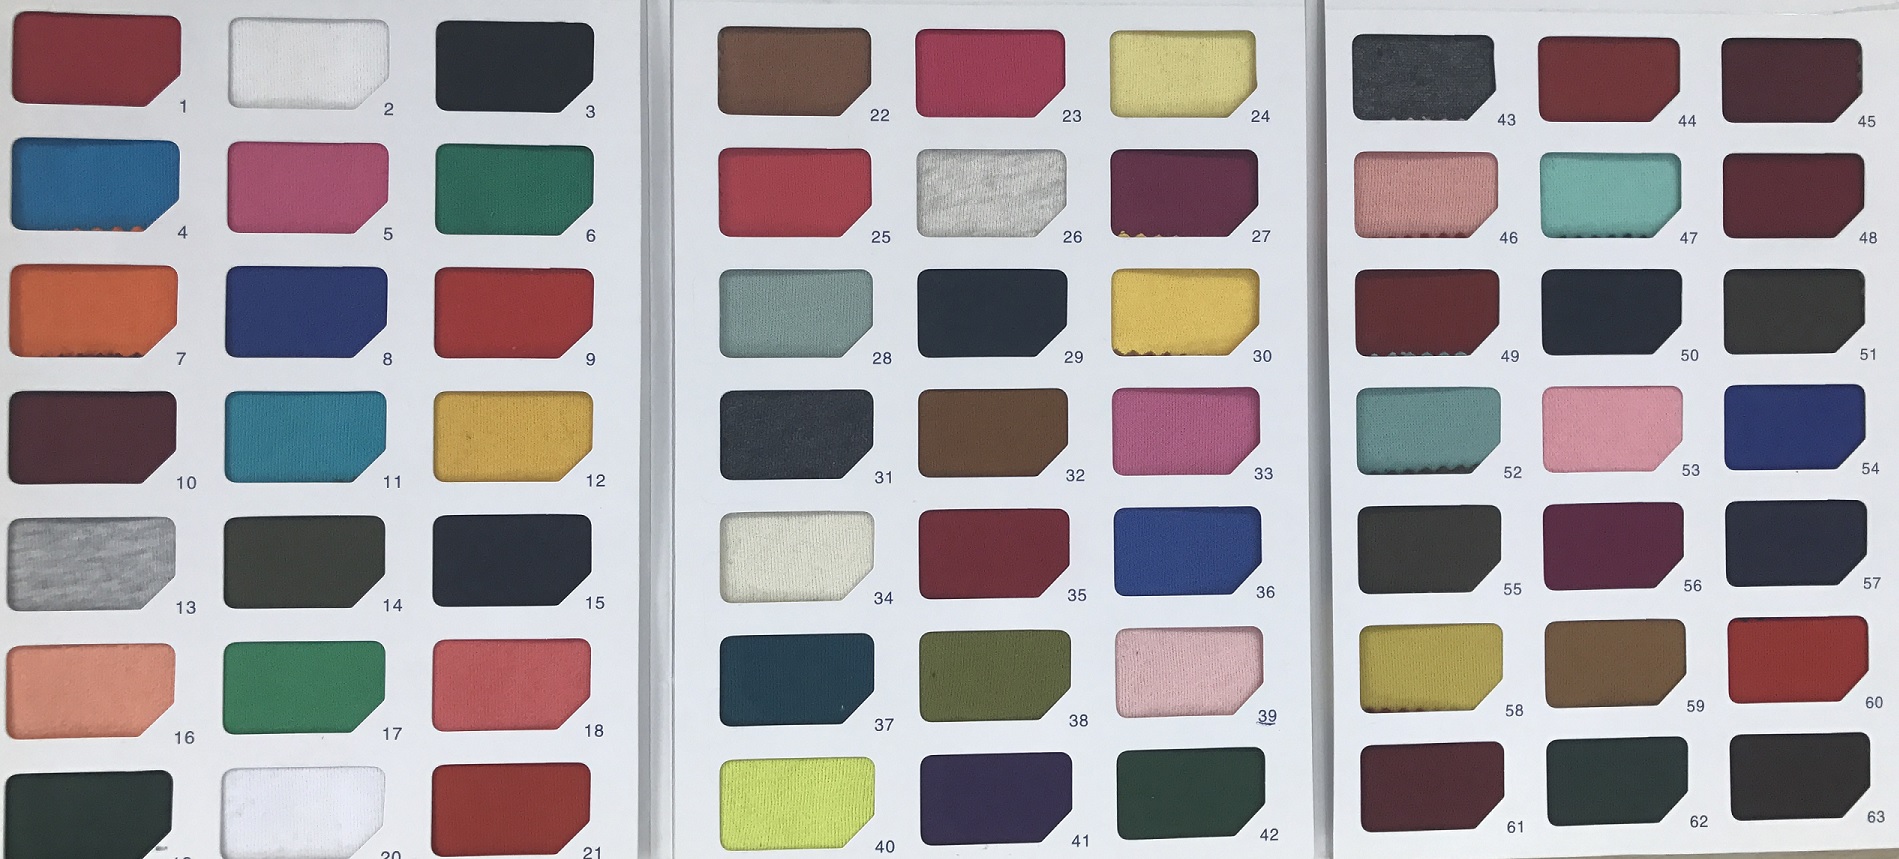 colour options for custom clothing